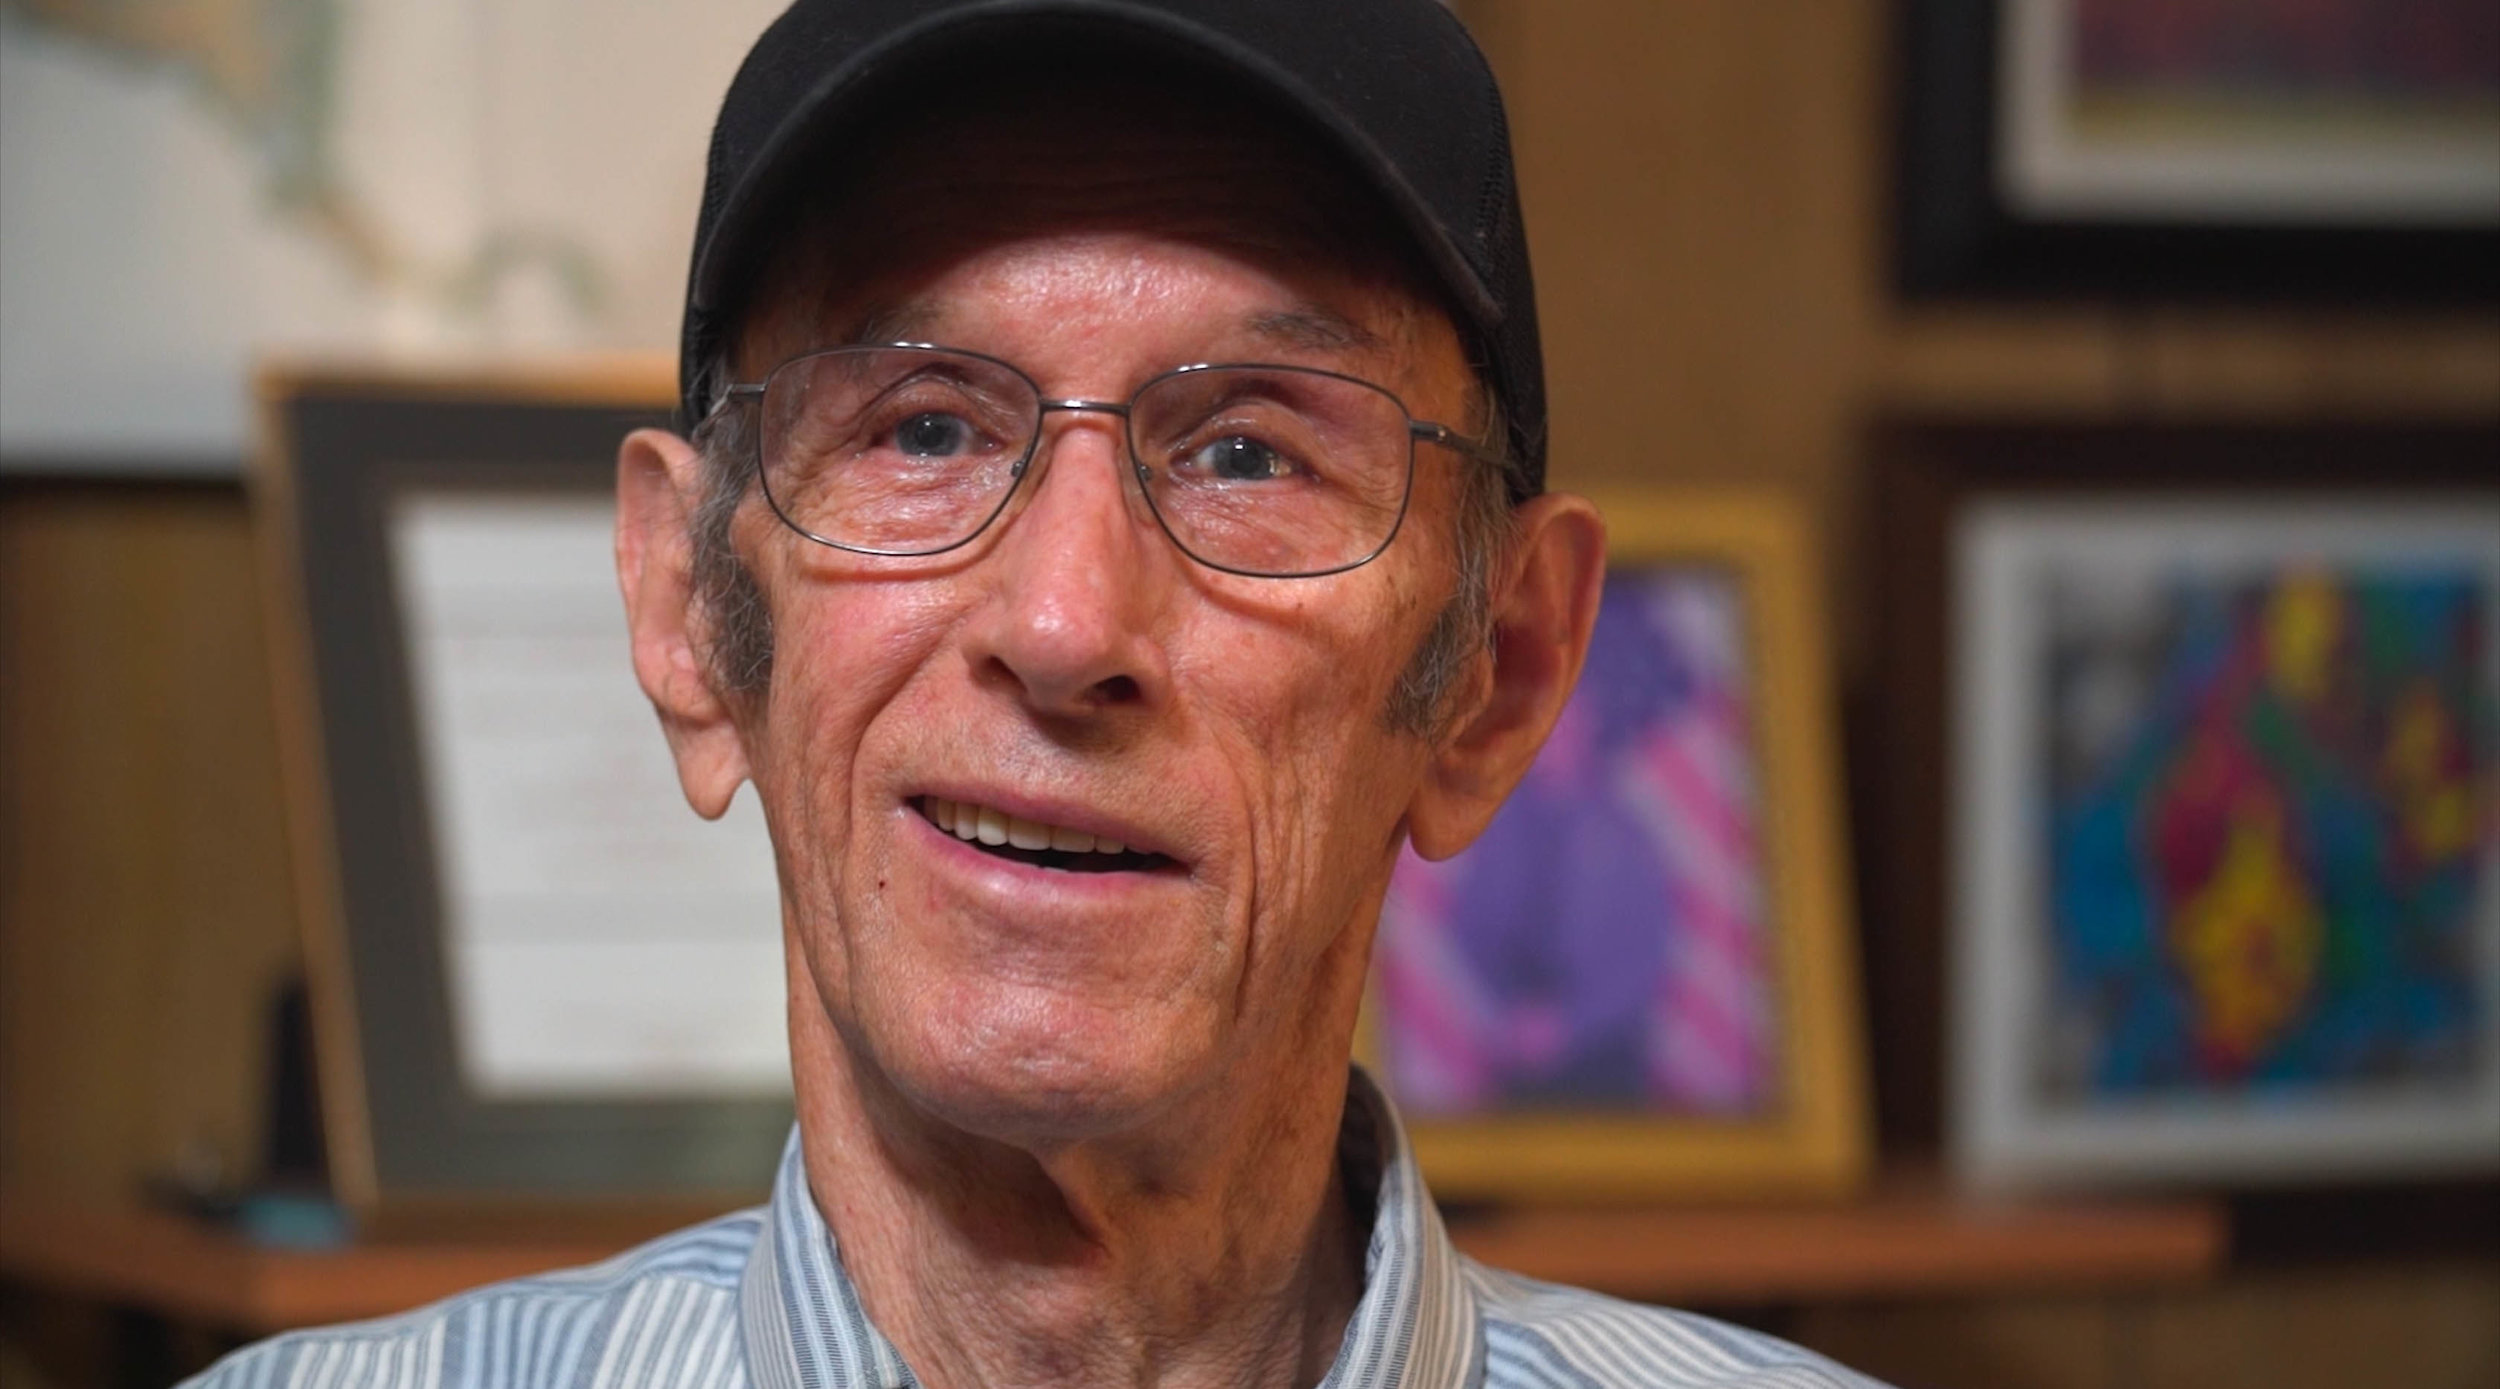 Meet the Man with 50+ Years of Weather Data from his Backyard